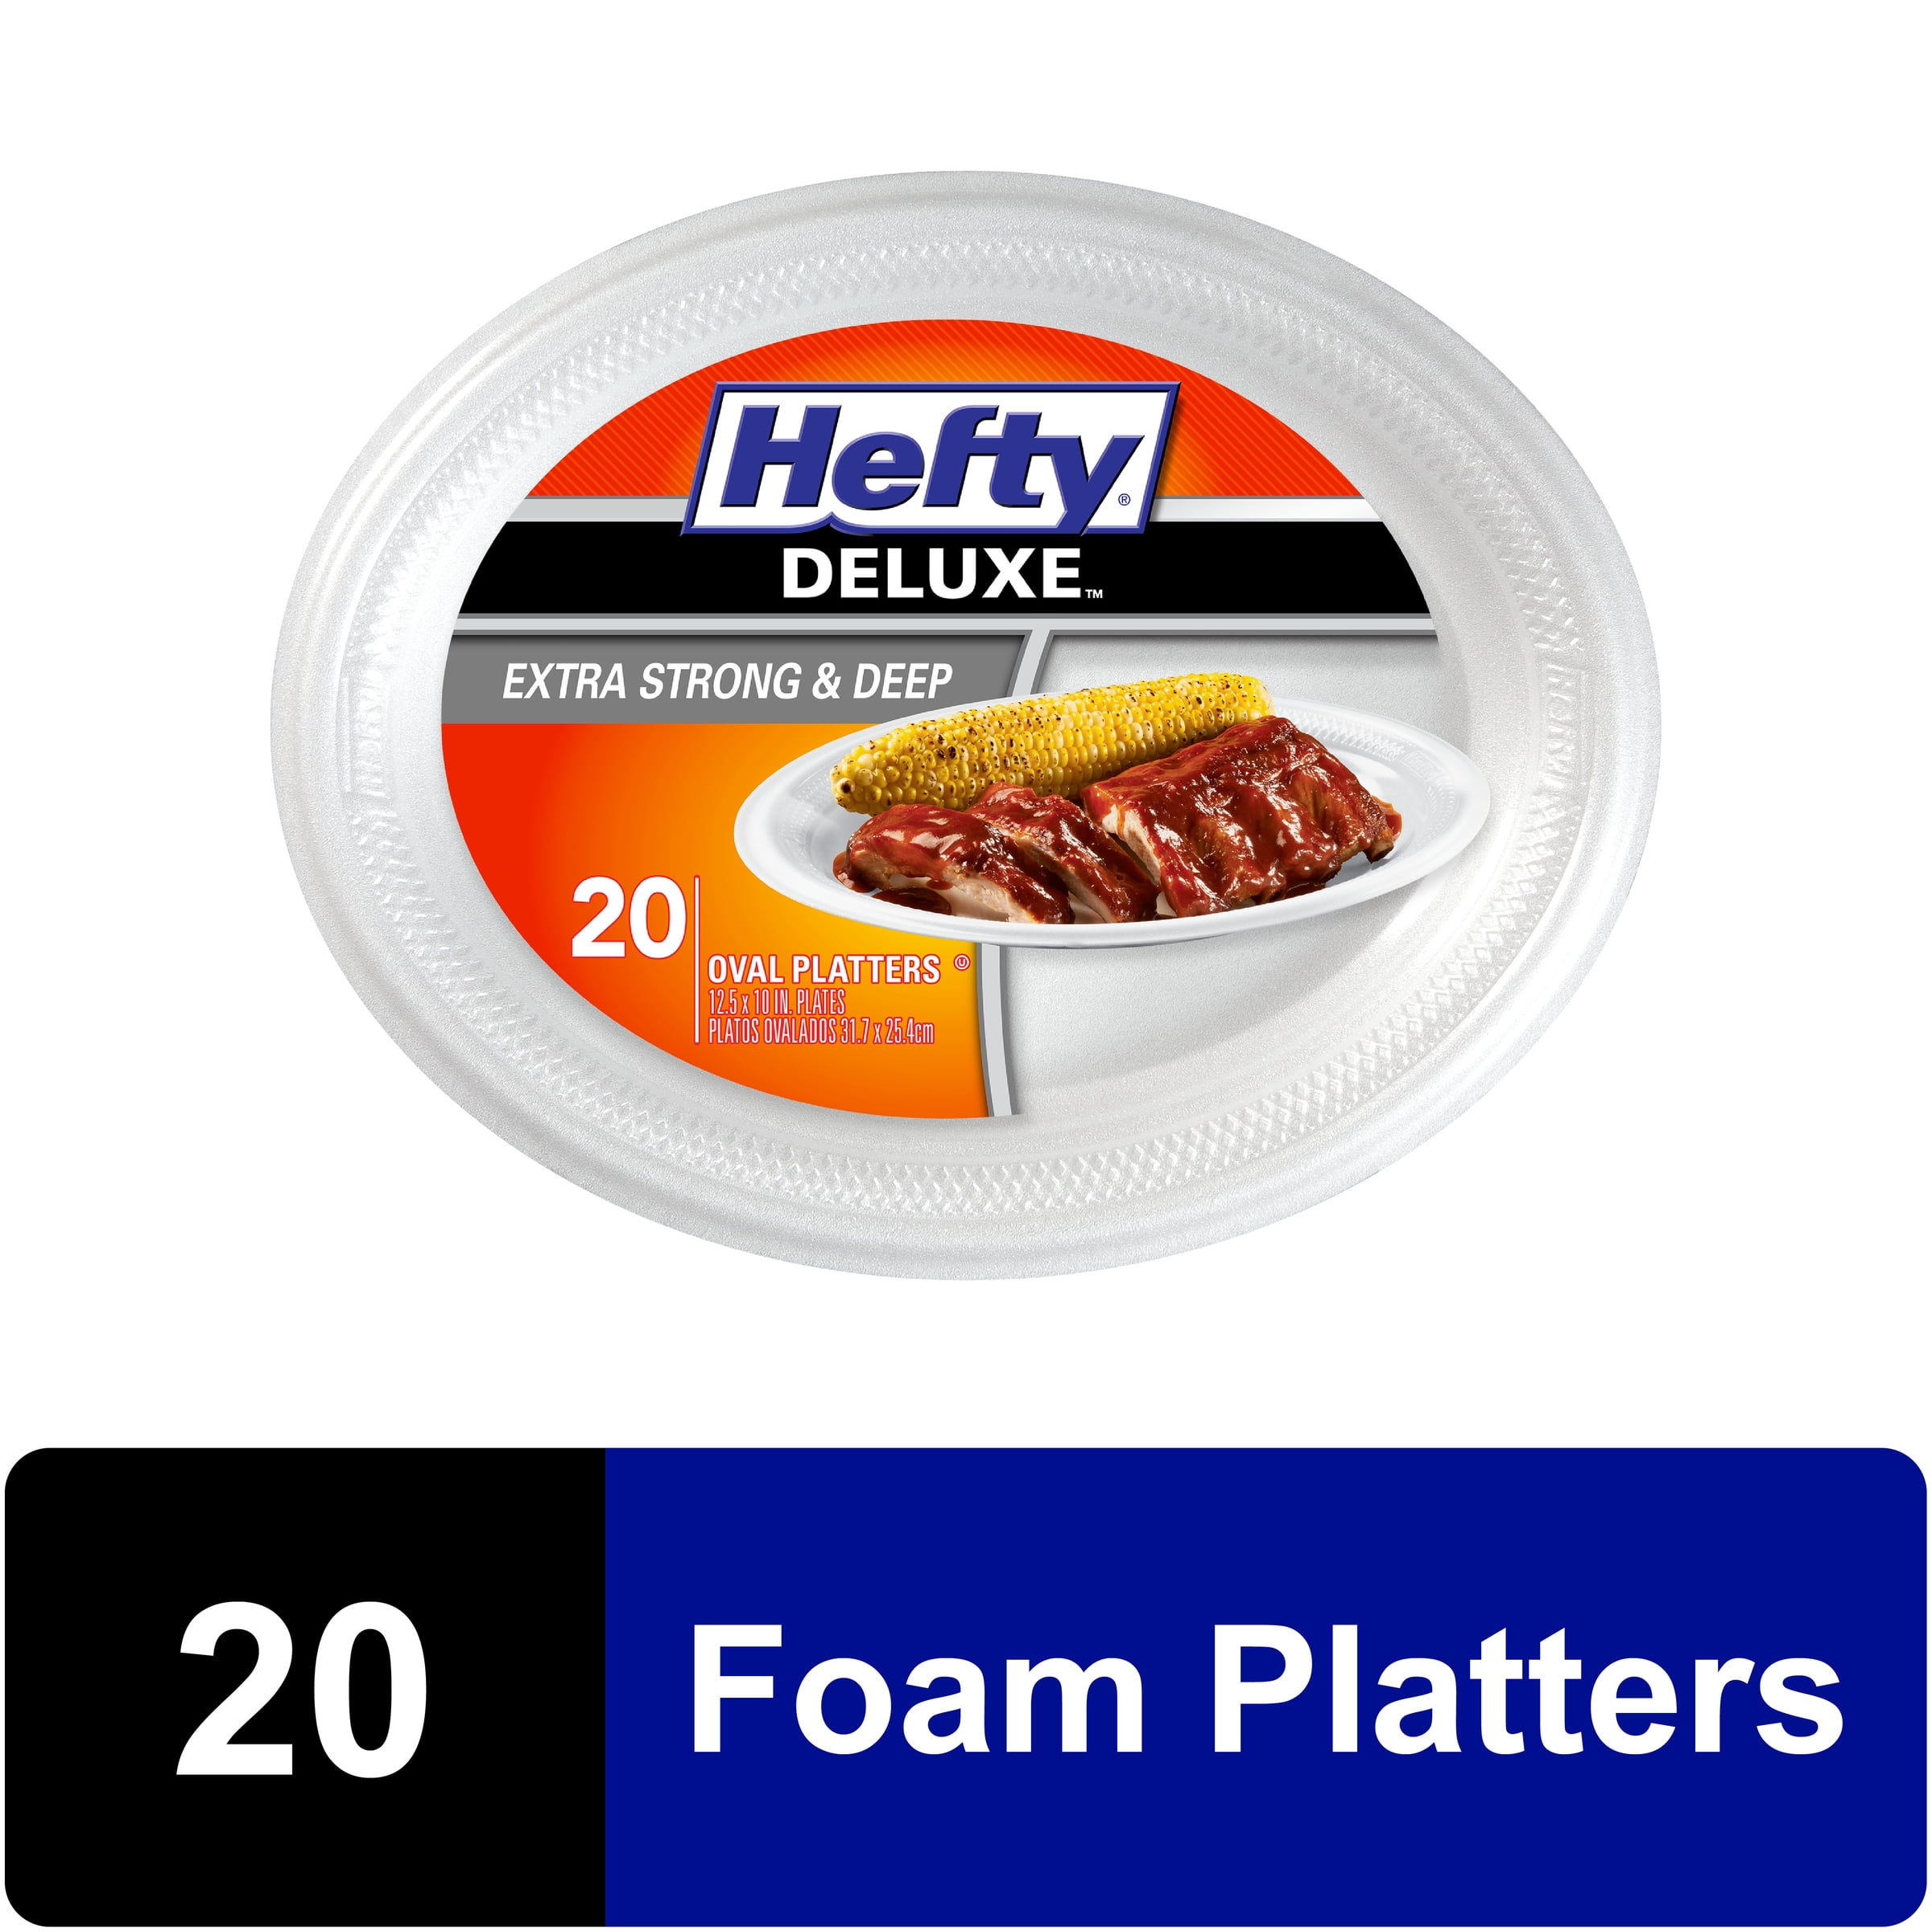 Hefty Style Blue 10.25 IN. Plastic Plates, 12 count 